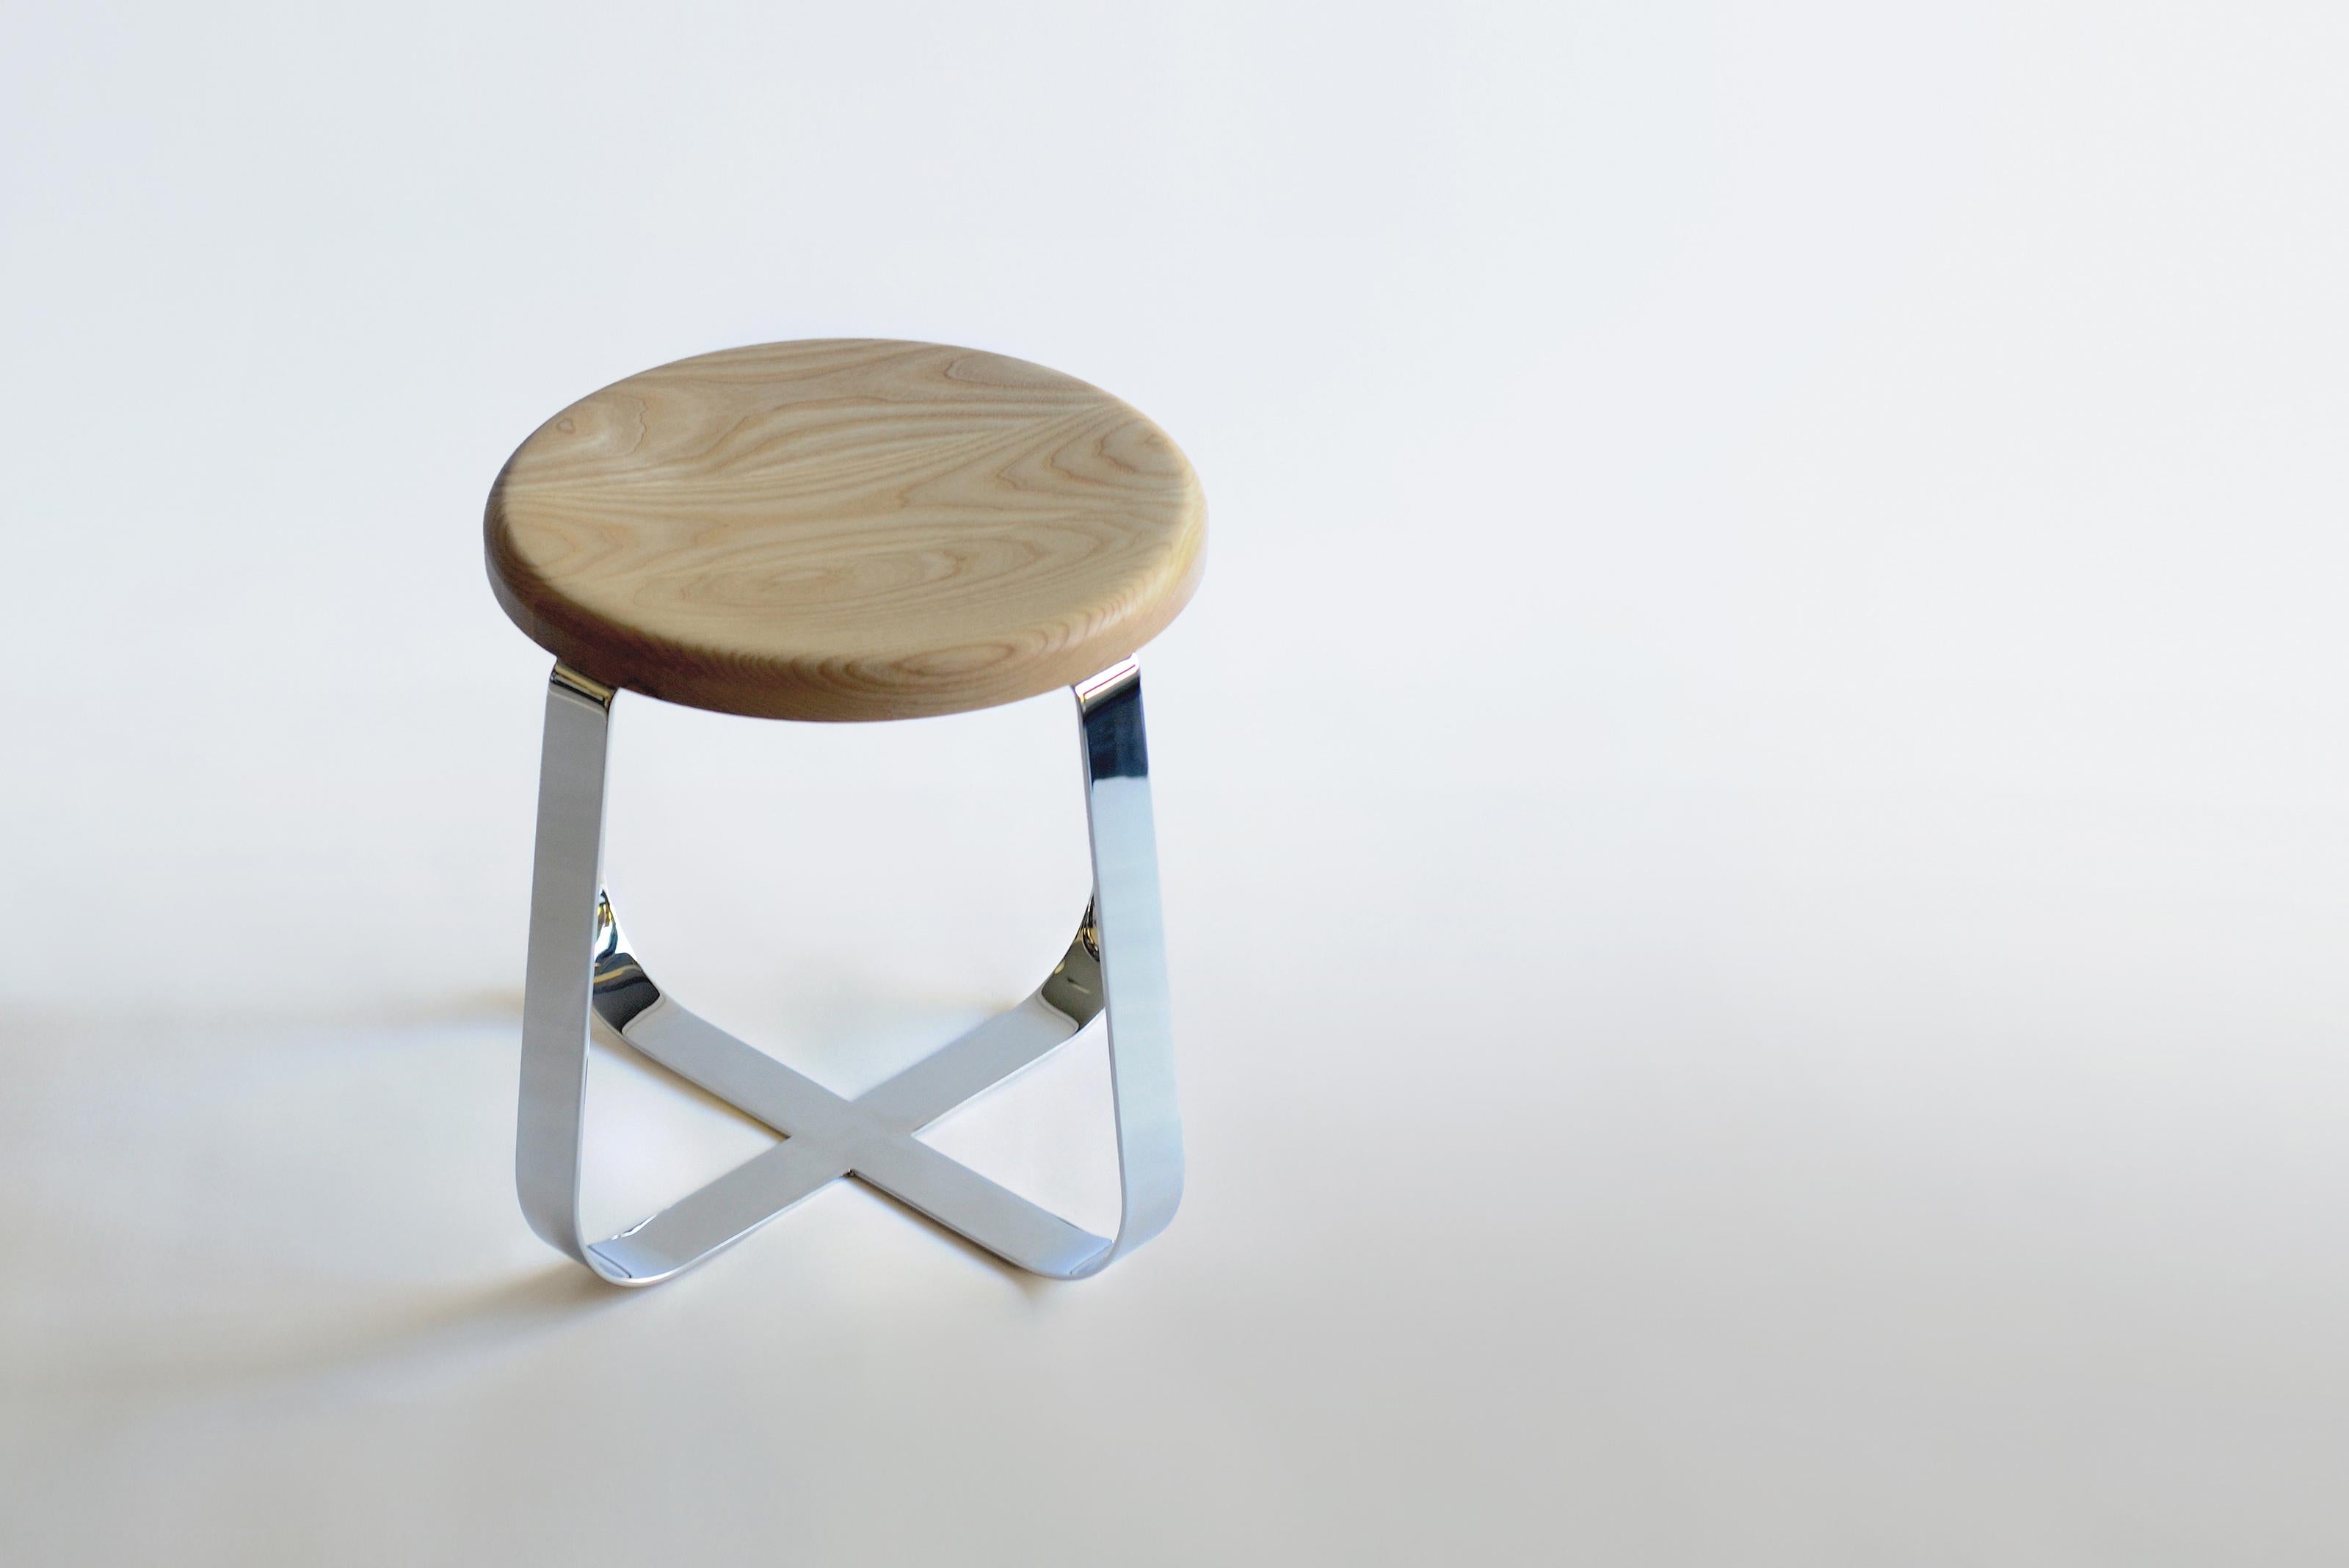 Primi Low Stool by Phase Design
Dimensions: Ø 48.3 x H 44.5 cm. 
Materials: Polished chrome and white ash.

Solid steel flat bar available in a flat black or white powder coat finish with CNC cut walnut, white ash, or upholstered top. Powder coat